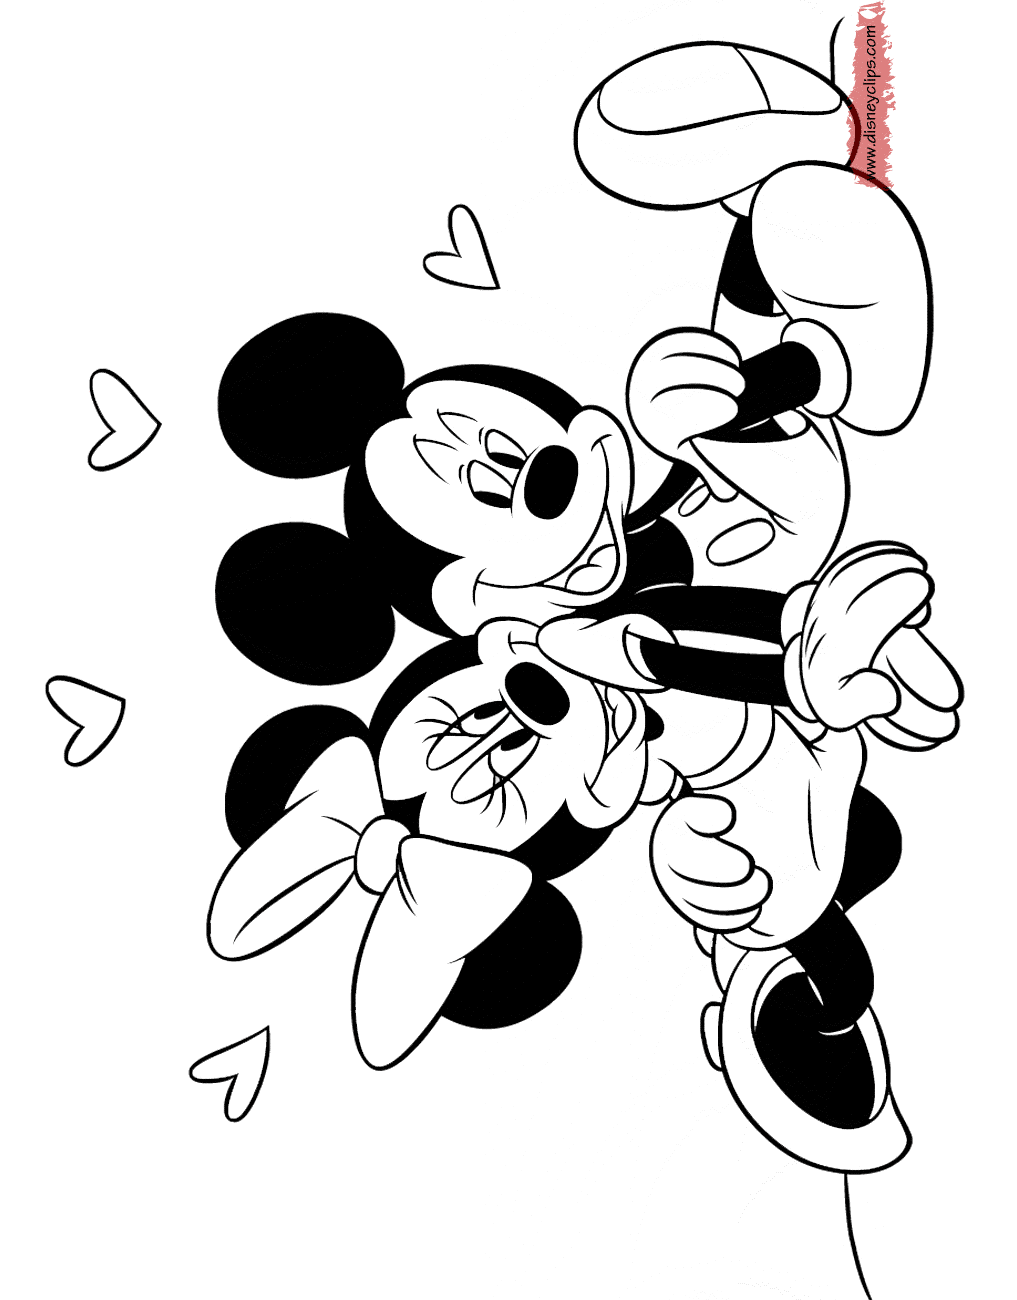 colouring pages of mickey mouse and minnie mickey mouse friends coloring pages 4 disney coloring book mouse of pages minnie mickey colouring and 